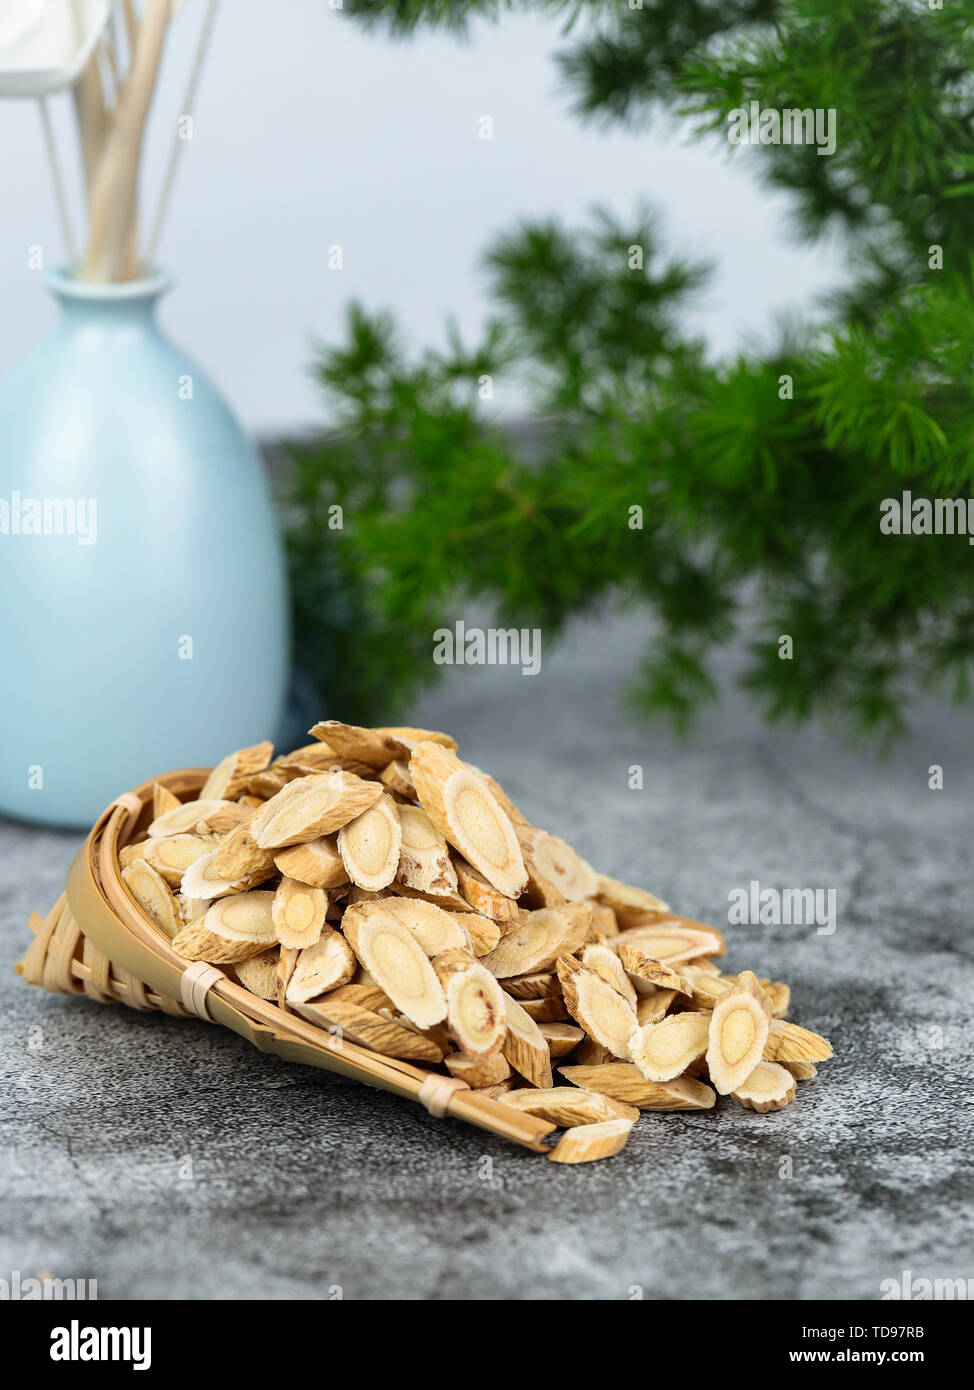 Astragalus tablets Stock Photo